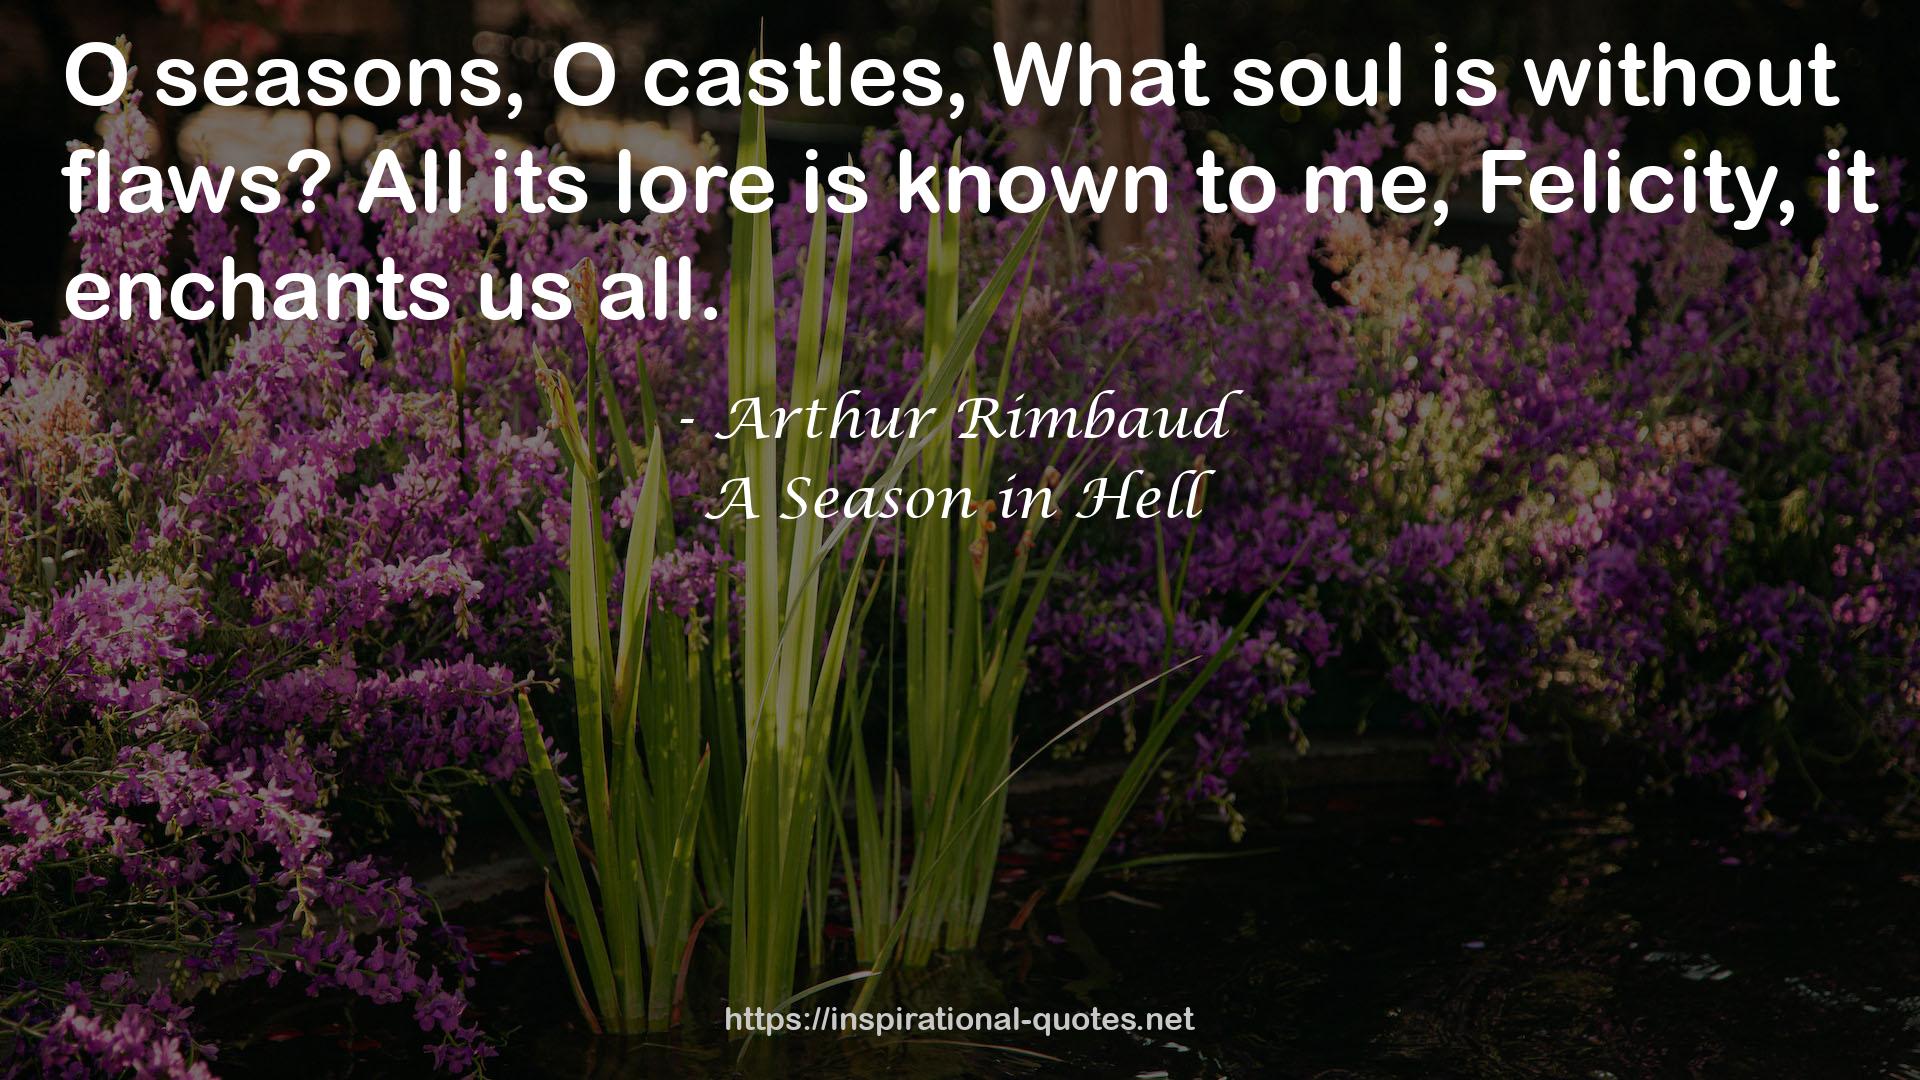 A Season in Hell QUOTES